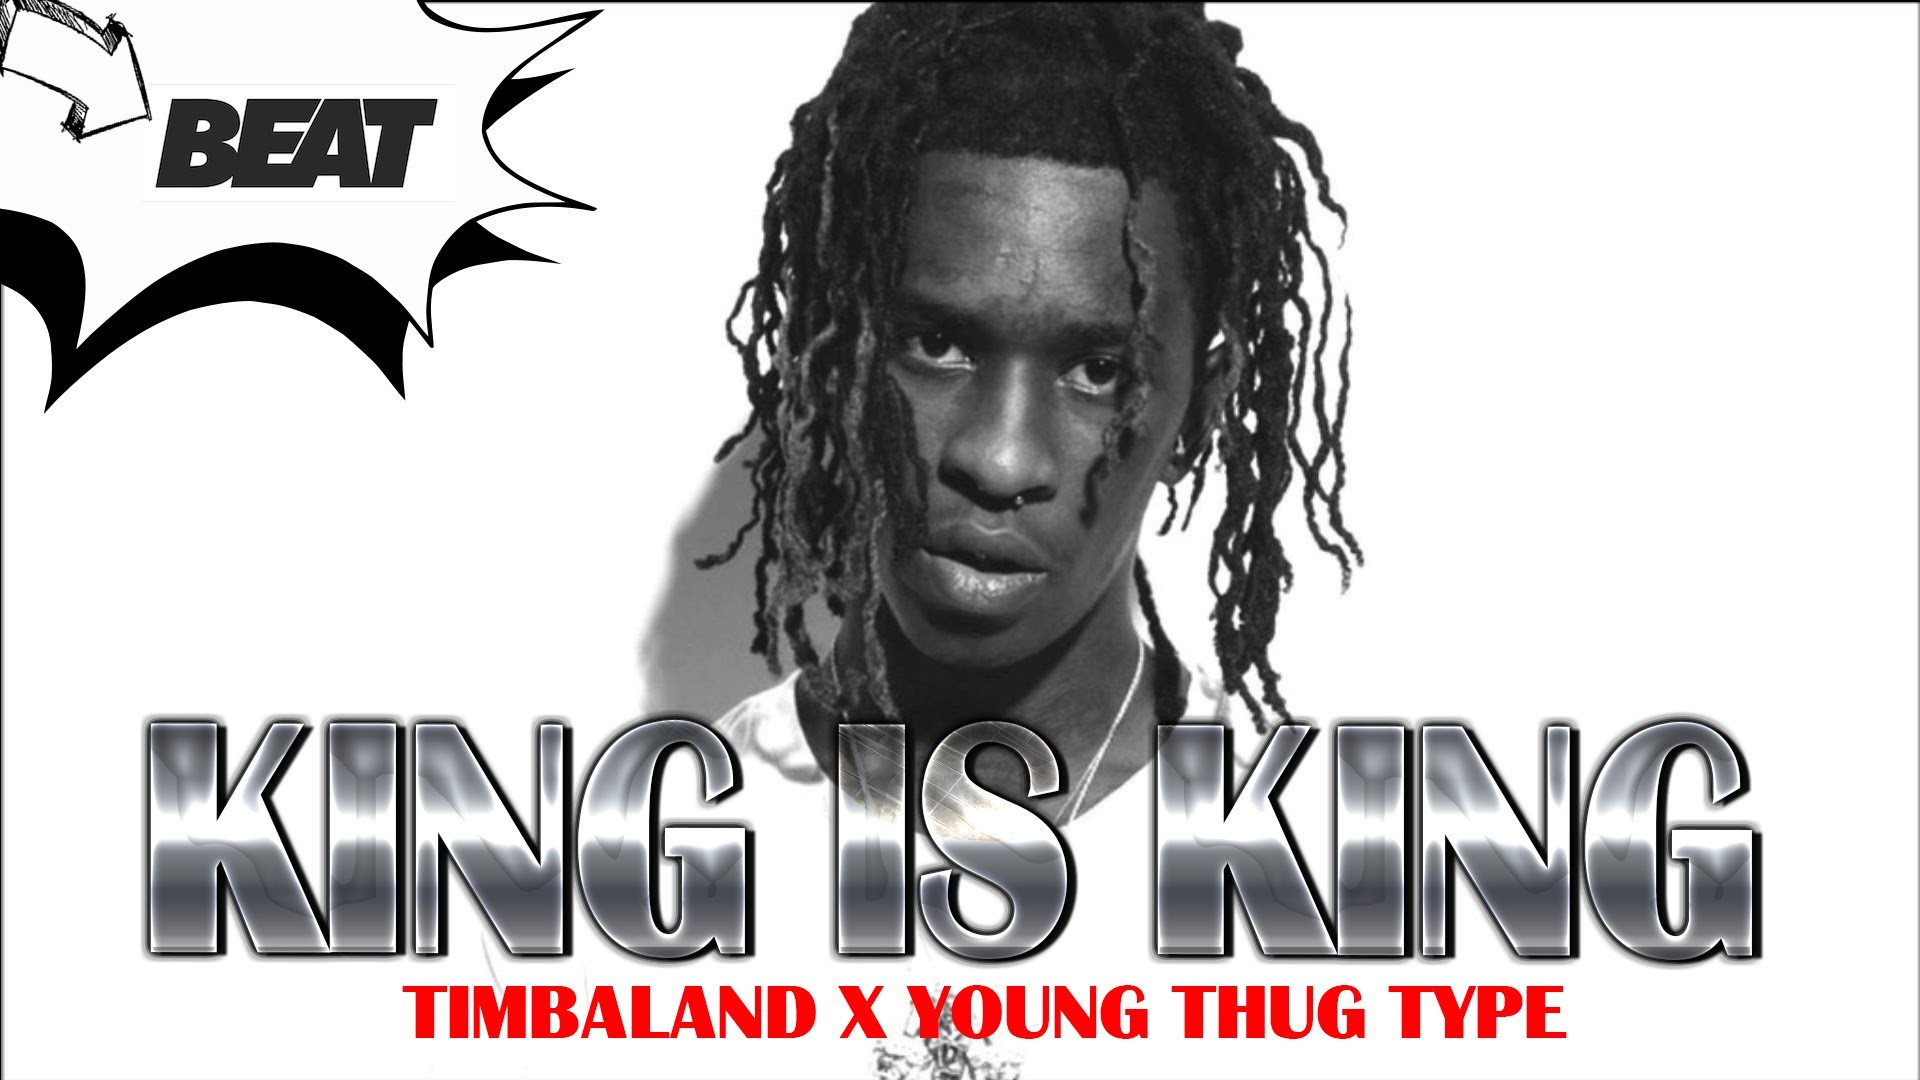 1920x1080 Dope Hip Hop Beat 2016 x Young Thug x Timbaland Type Instrumental 2016 -  King Is King - FREE DL